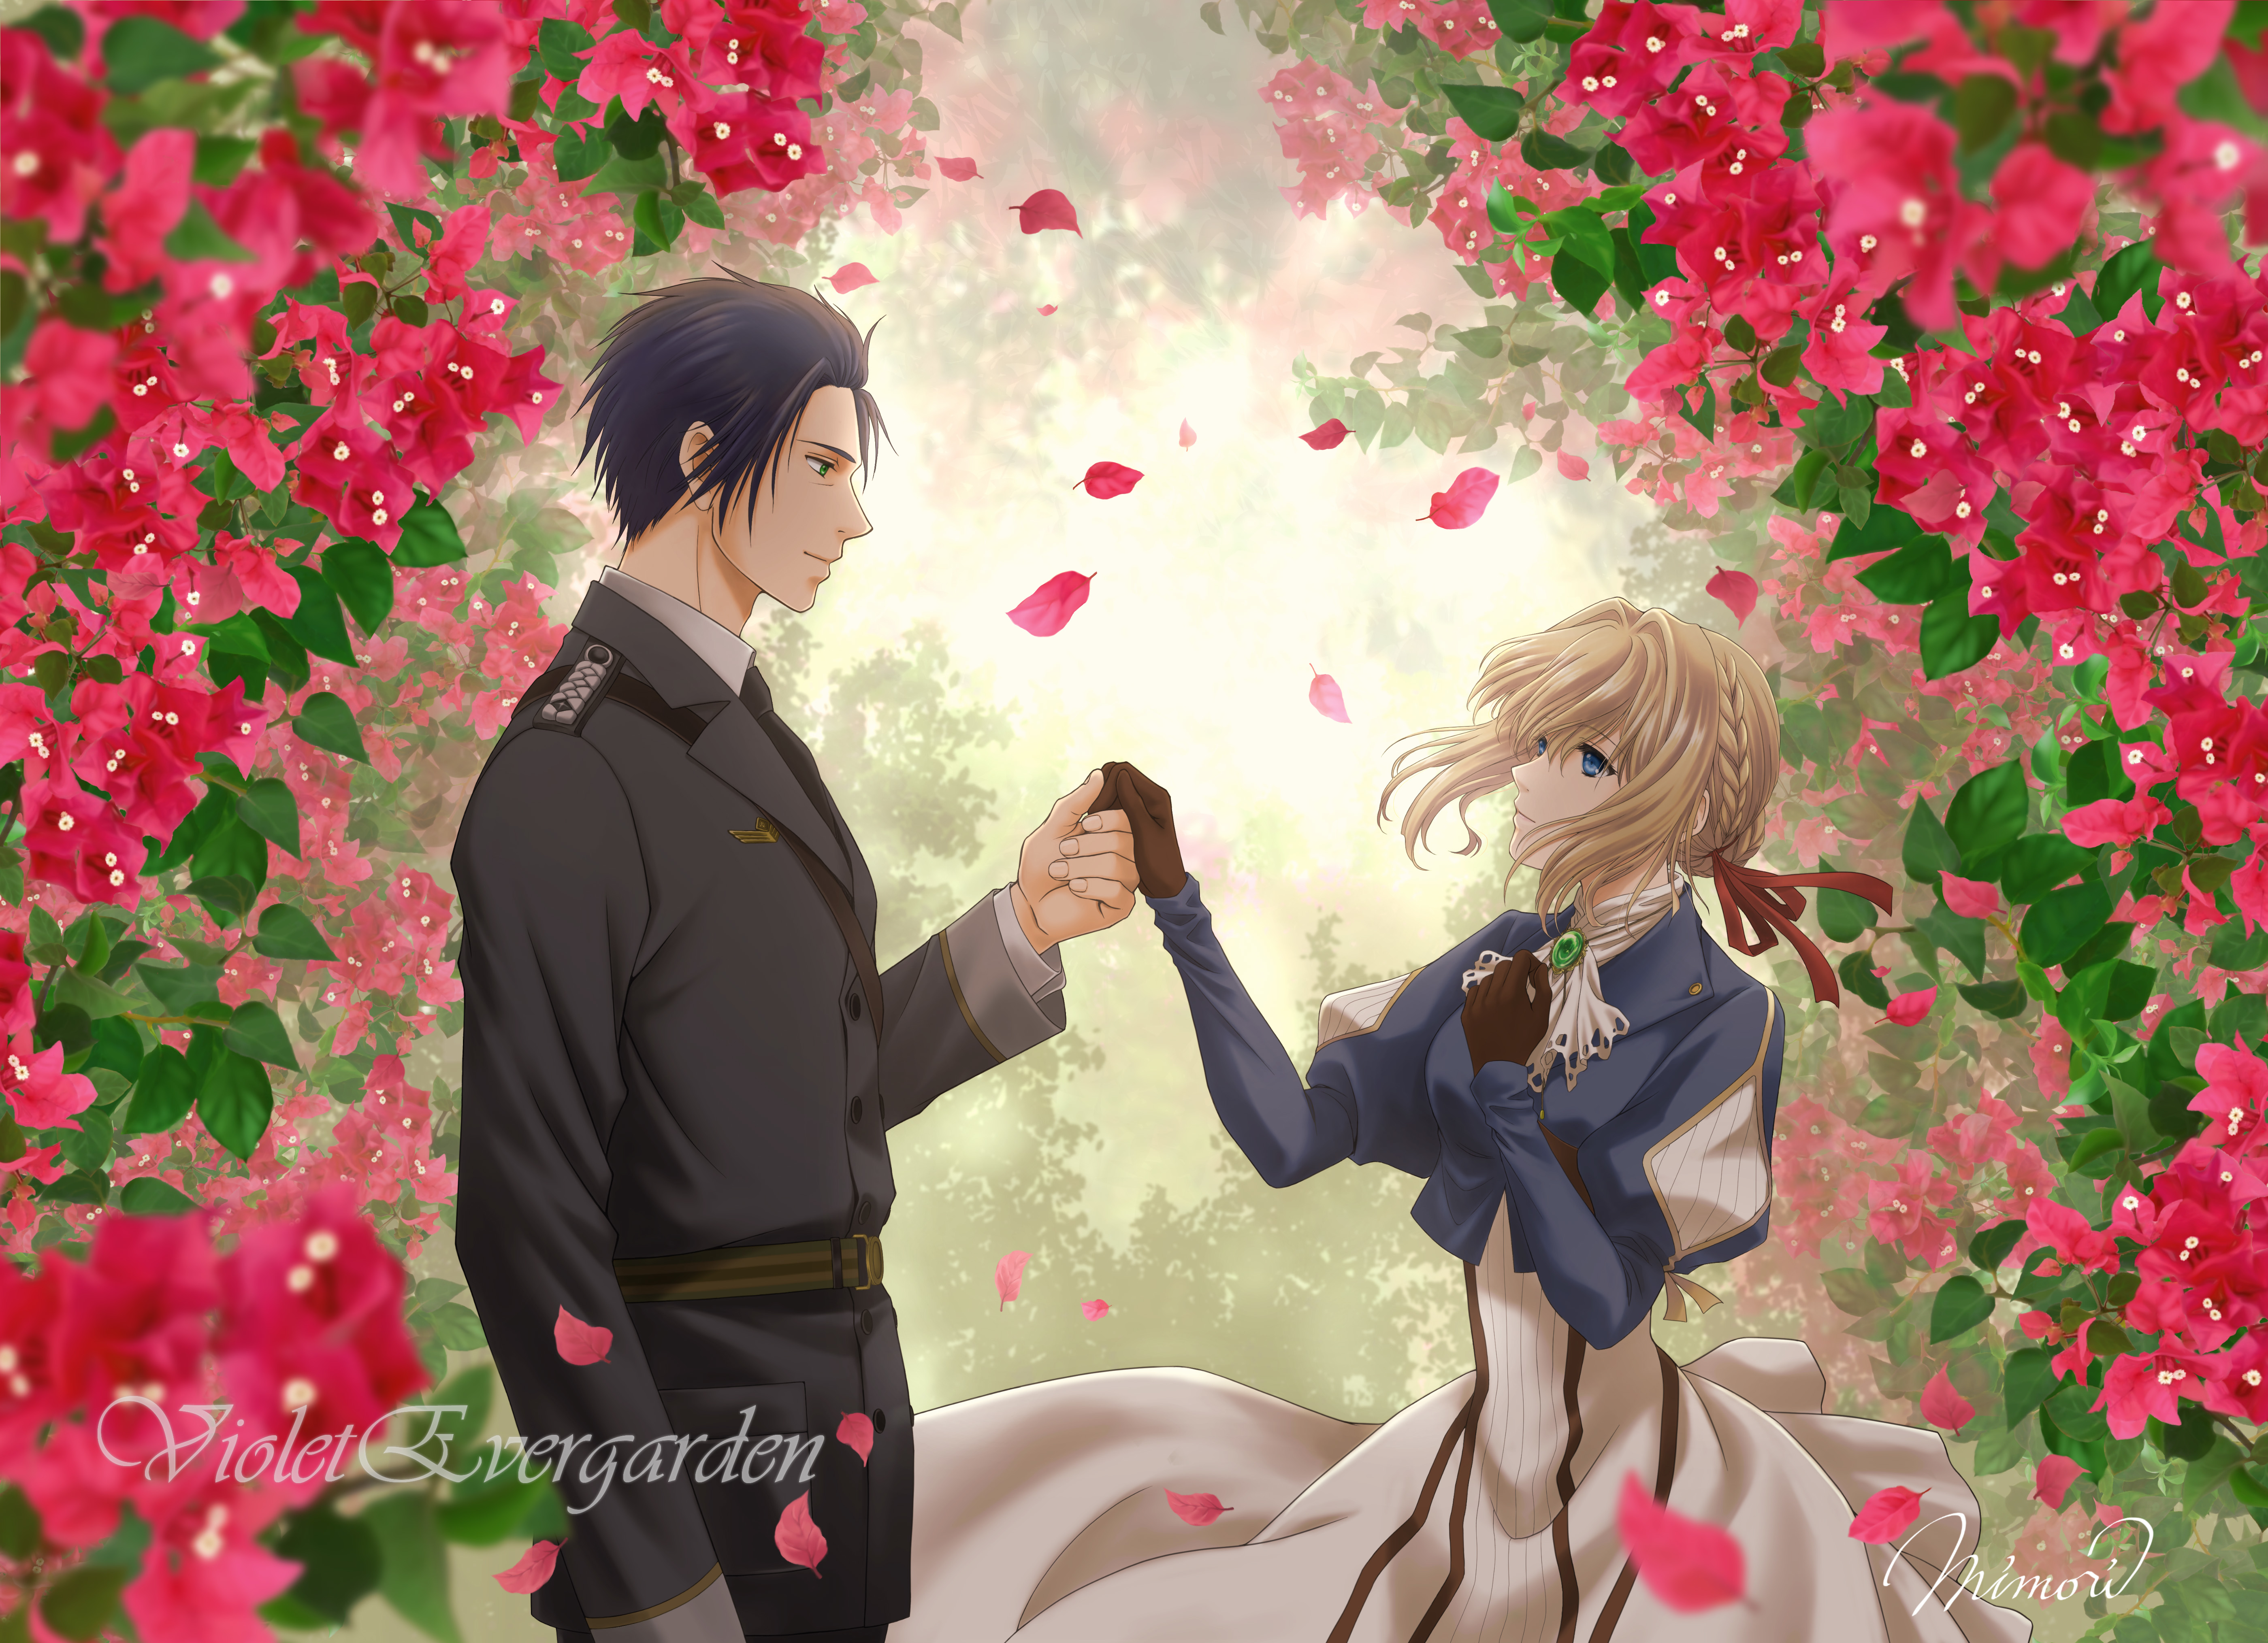 Violet Evergarden 4k Anime Wallpaper, HD Anime 4K Wallpapers, Images,  Photos and Background - Wallpapers Den